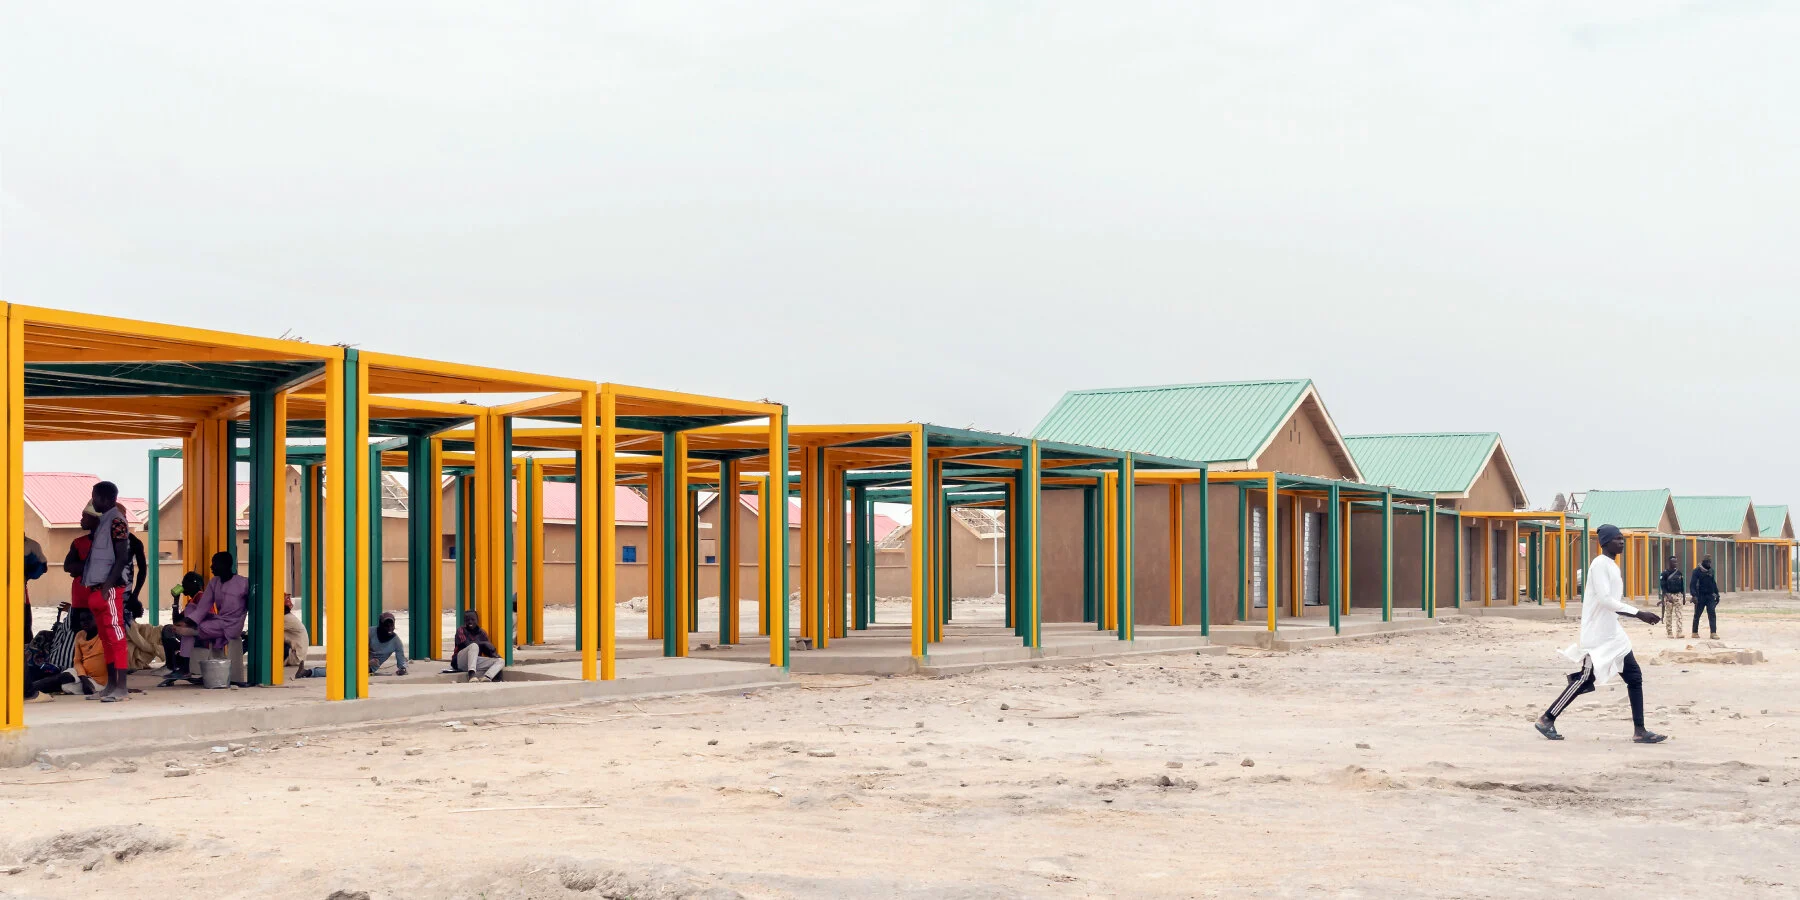 An covered pavilion that can be used for various activities in the center of the village